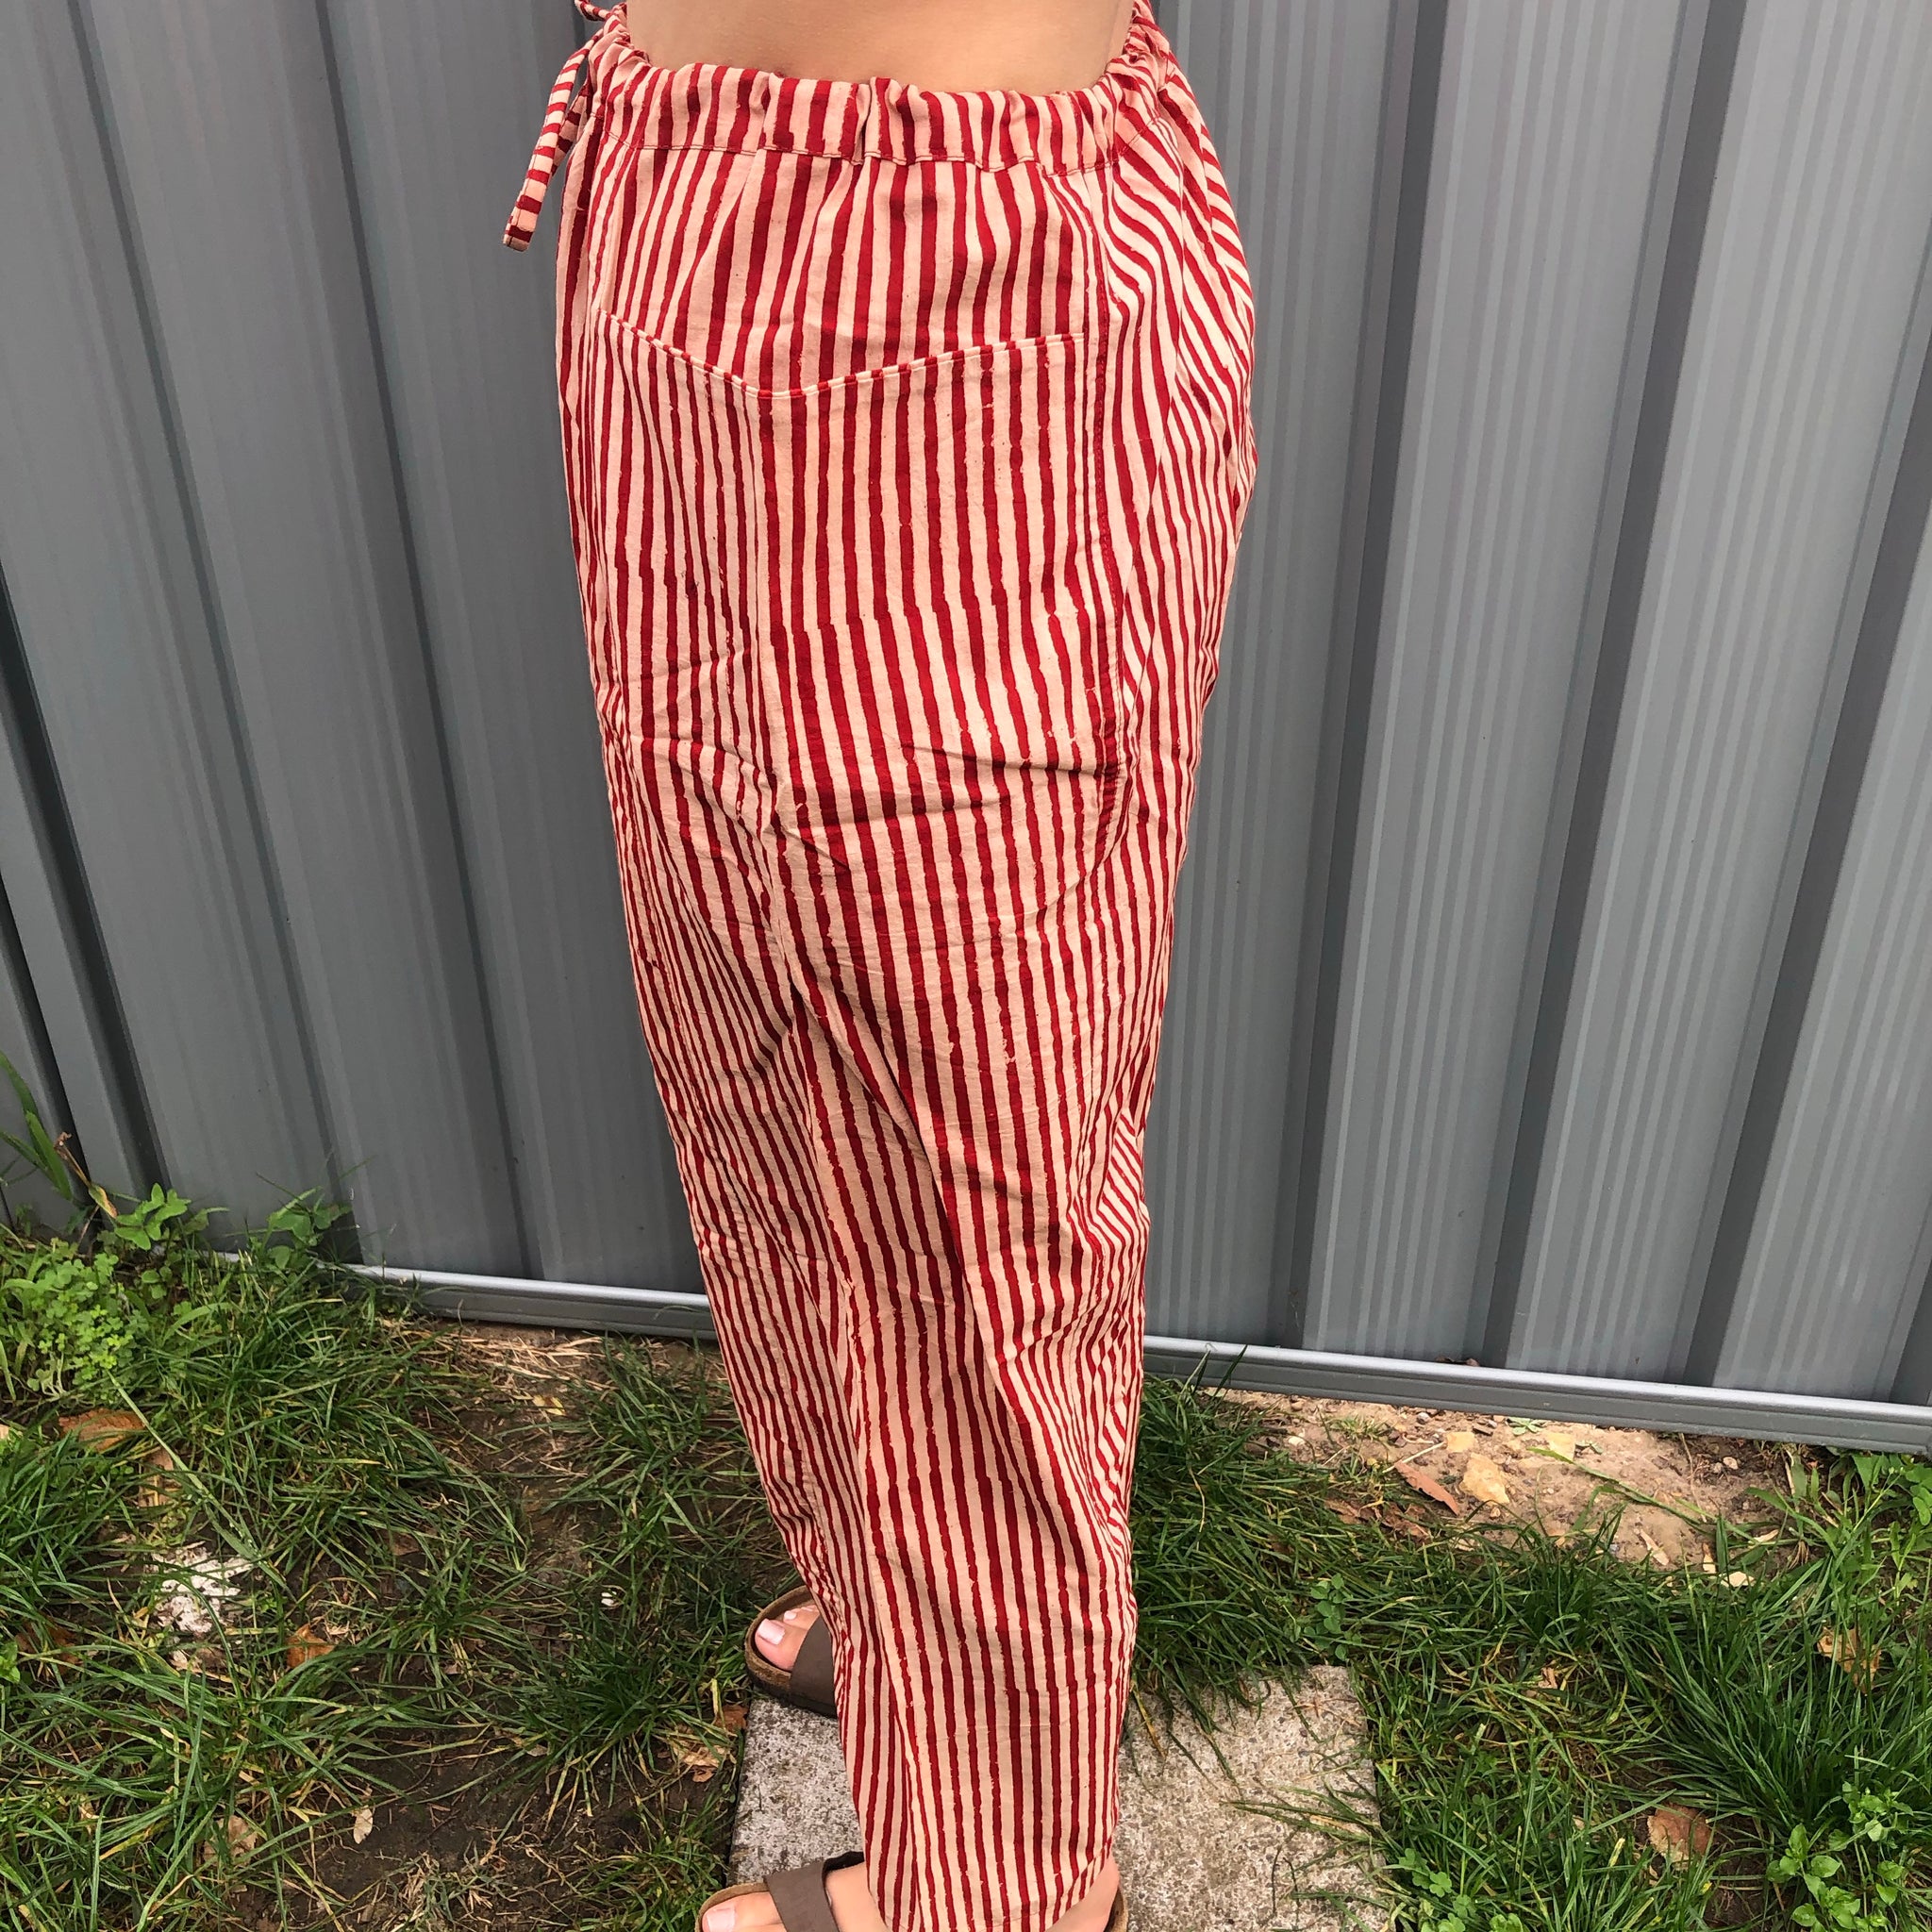 Fair Trade Ethical Striped Cotton Striped Pants in Red